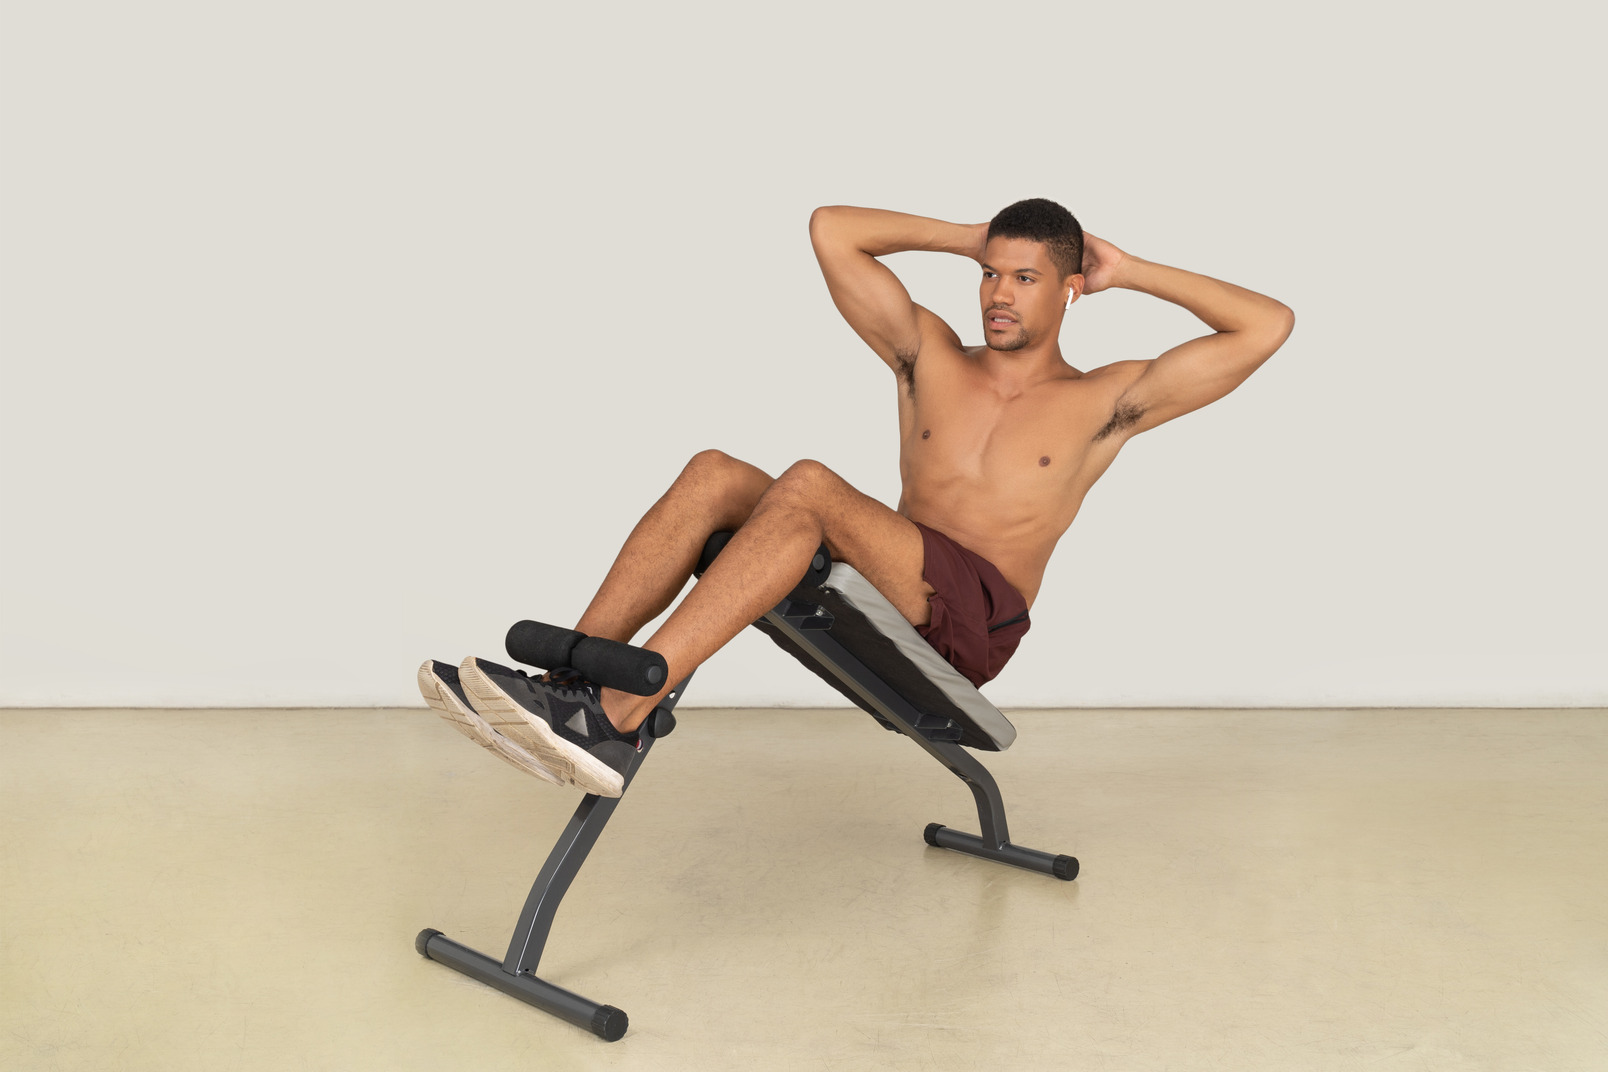 A three-quarter side view of the young muscular man doing exercises and looking forward